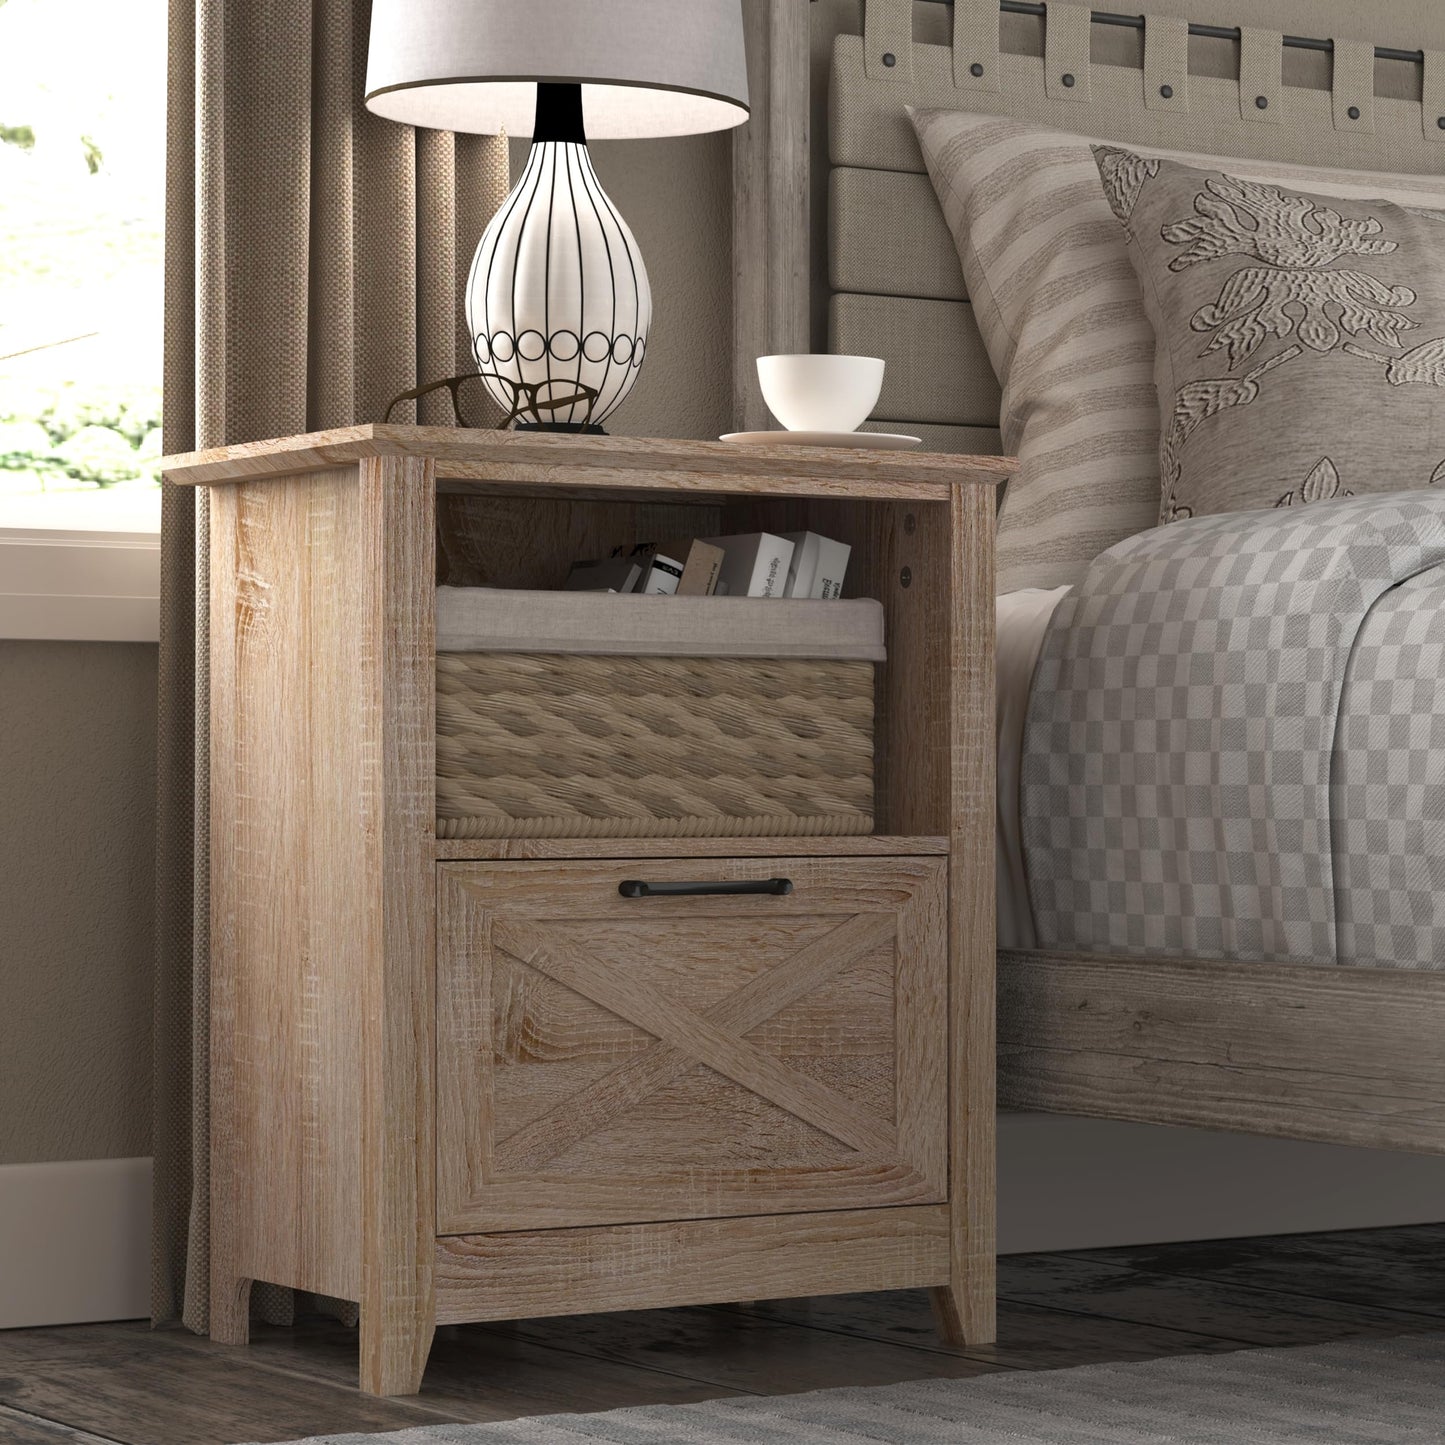 PrimeZone 30" Tall Nightstand for King & Queen Bed with Storage Drawer & Open Cubby - Beige Wood End Table Bedside Table for Living Room, Bedroom,